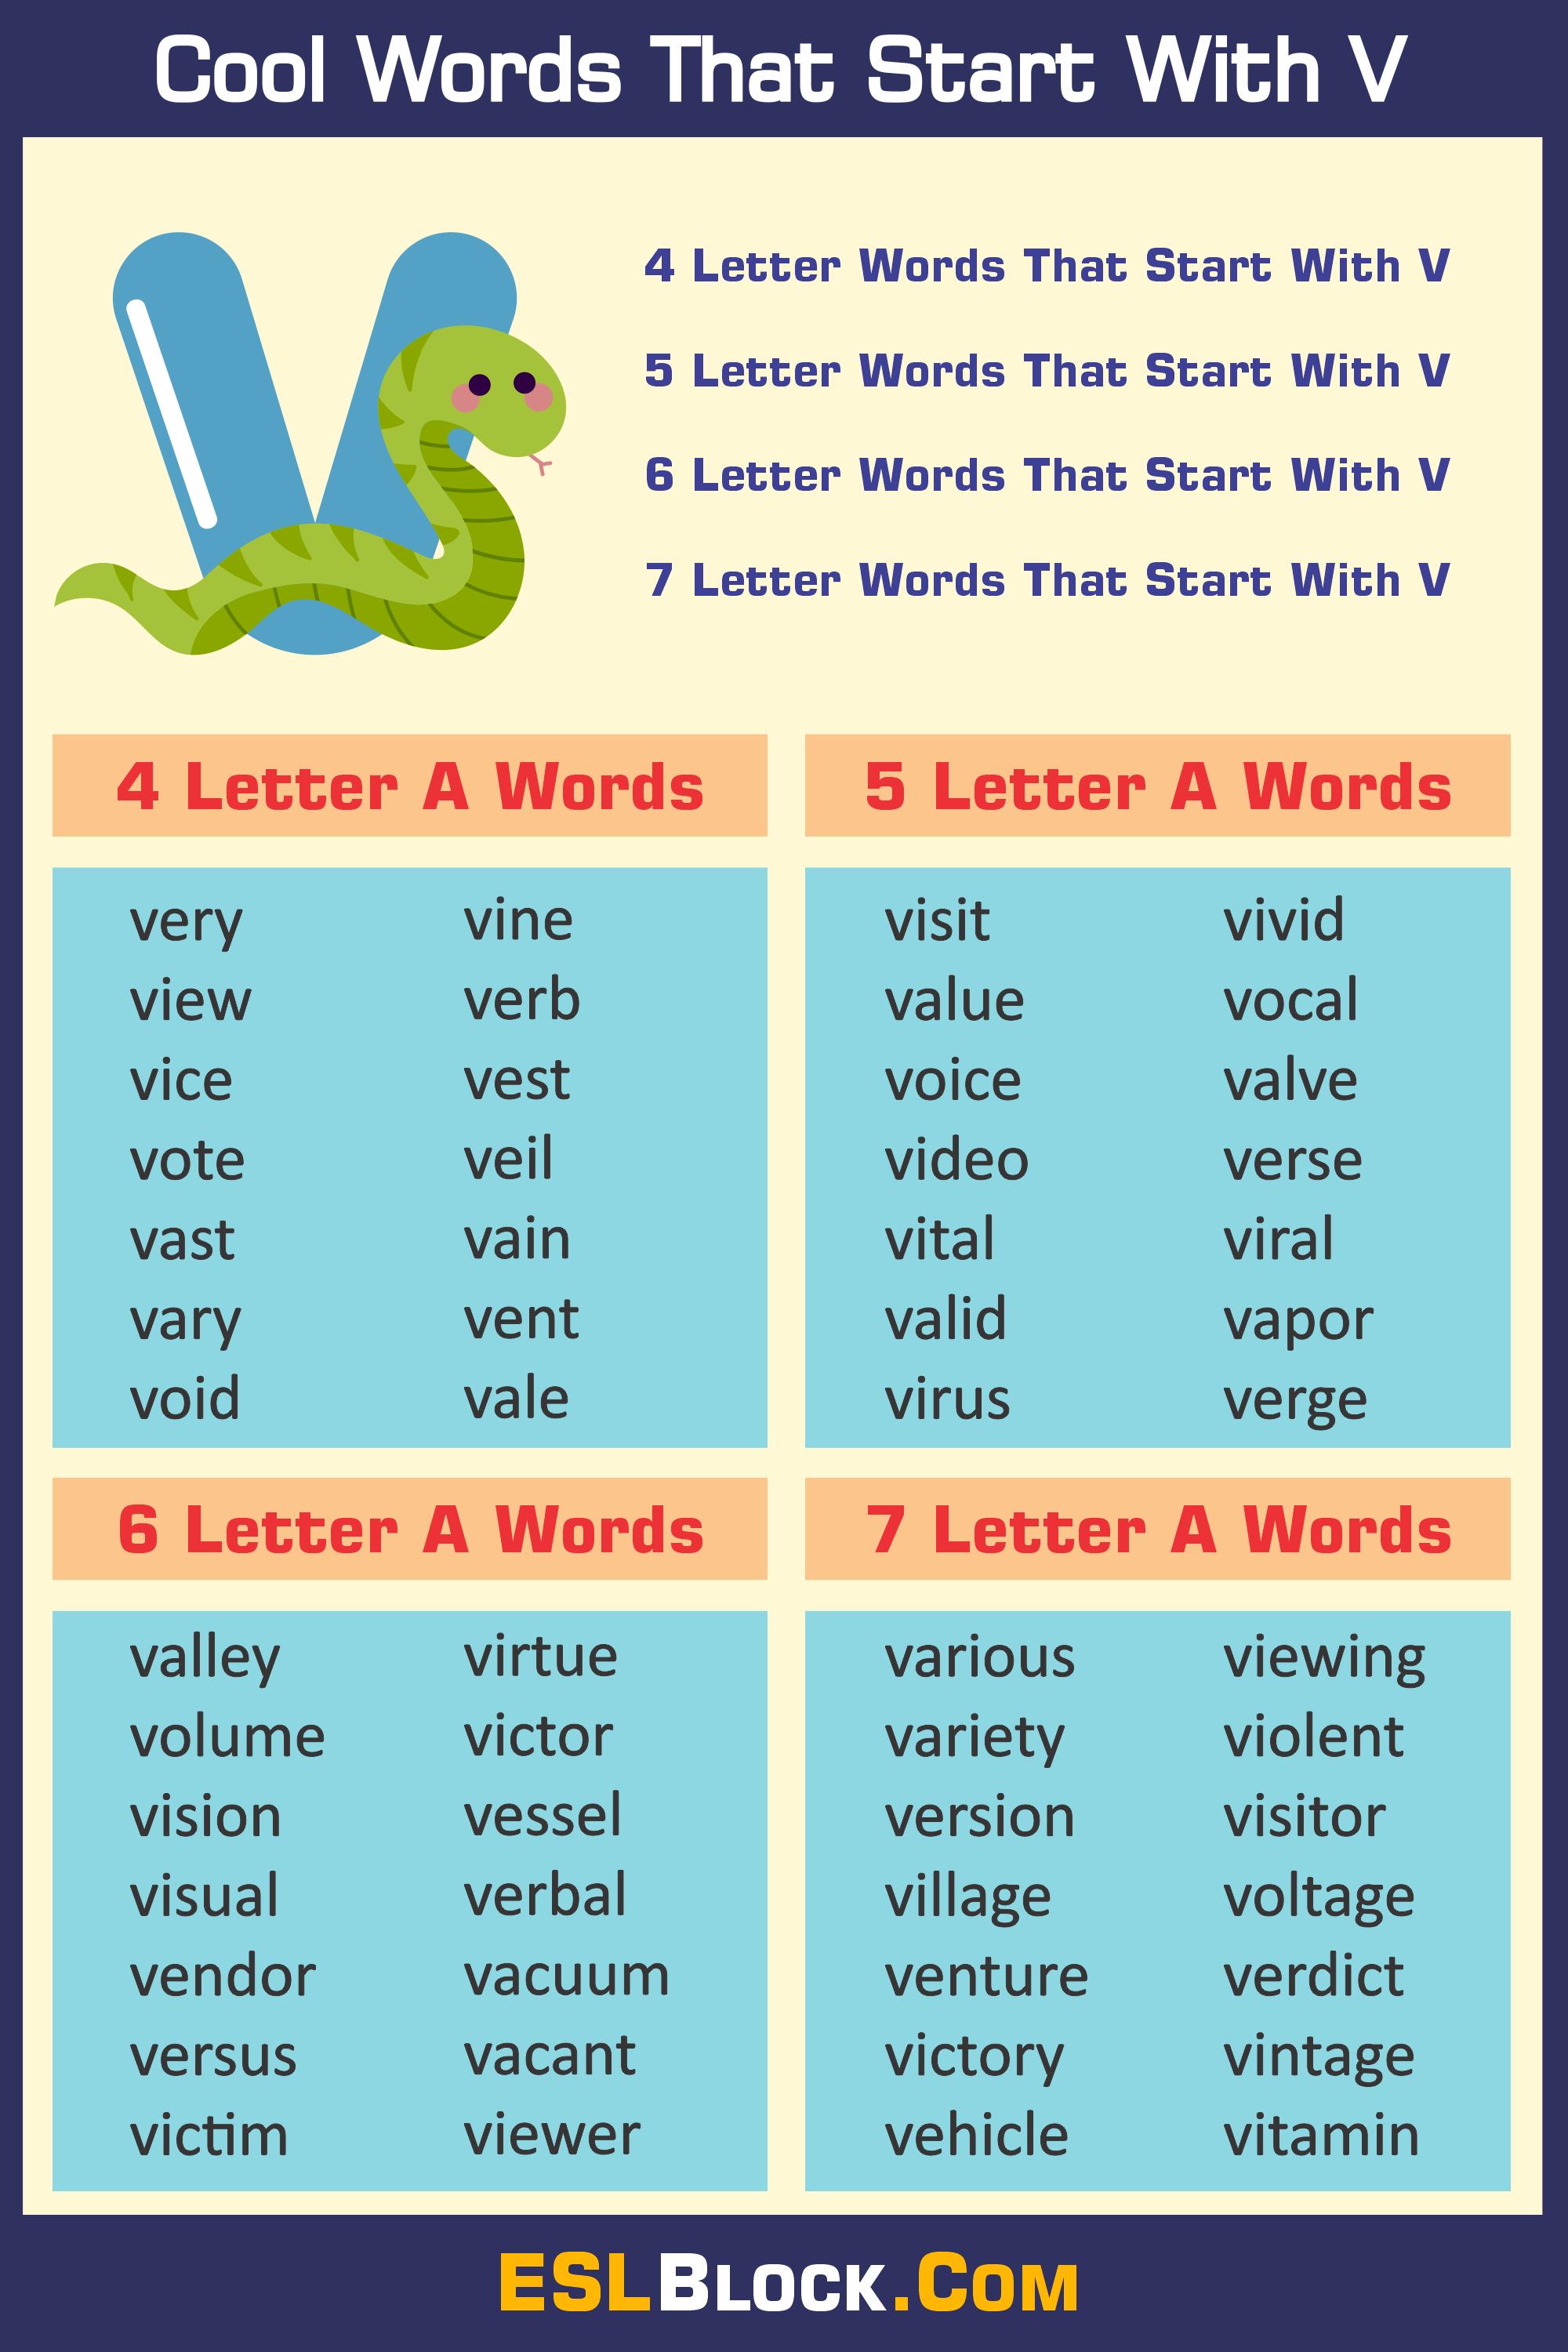 4 Letter Words, 4 Letter Words That Start With V, 5 Letter Words, 5 Letter Words That Start With V, 6 Letter Words, 6 Letter Words That Start With V, 7 Letter Words, 7 Letter Words That Start With V, Awesome Cool Words, Christmas Words That Start With V, Cool Words, Describing Words That Start With V, Descriptive Words That Start With V, English Words, Five Letter Words Starting with V, Good Words That Start With V, Nice Words That Start With V, Positive Words That Start With V, Unique Words, V Words, Word Dictionary, Words That Start With V, Words That Start With V to Describe Someone